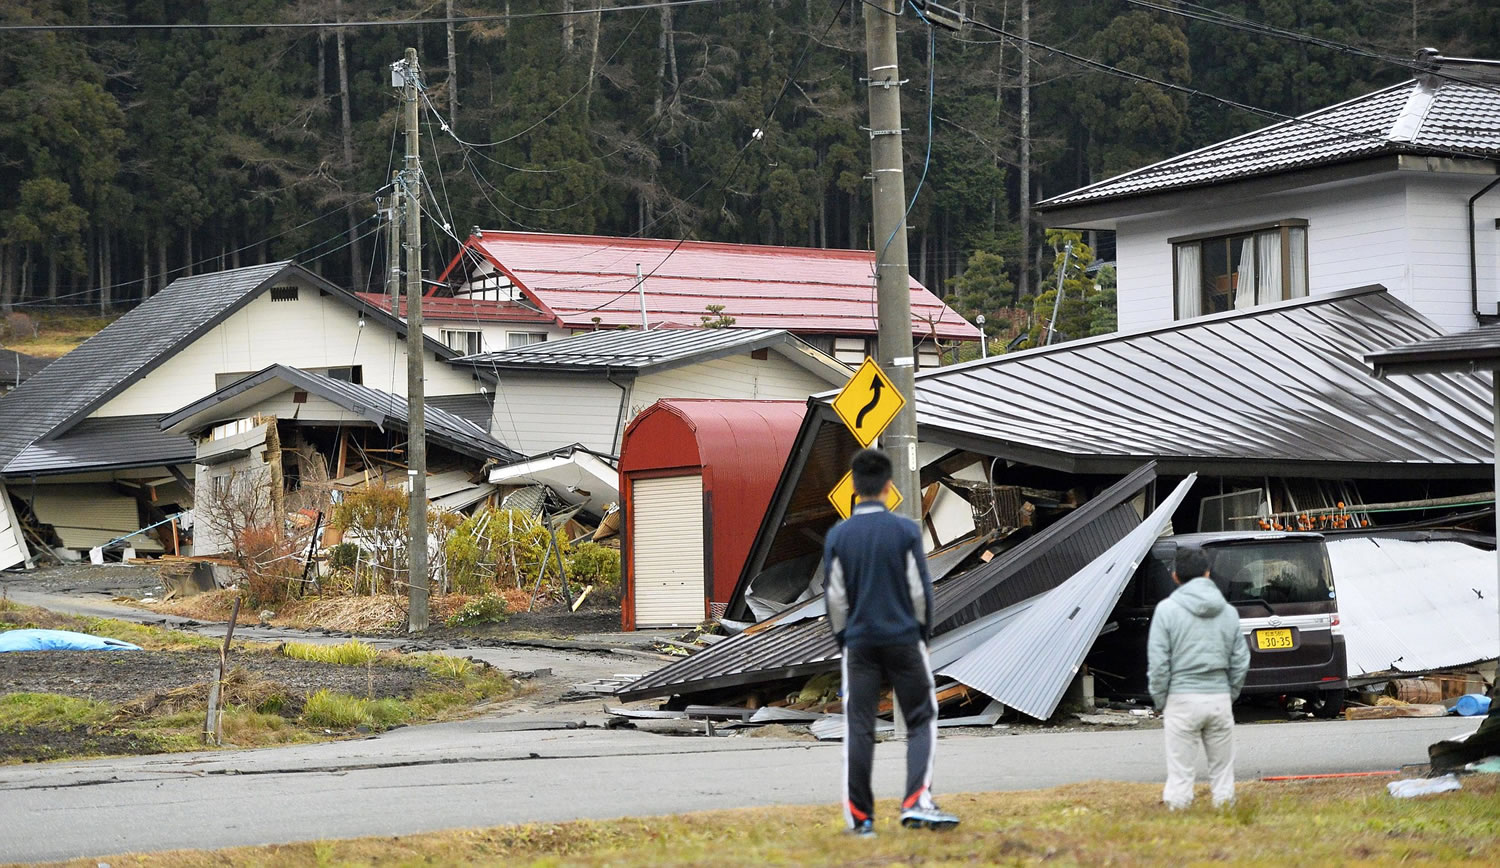 Residents look at collapsed houses early today after a strong earthquake Saturday night in Hakuba, Nagano prefecture, Japan.